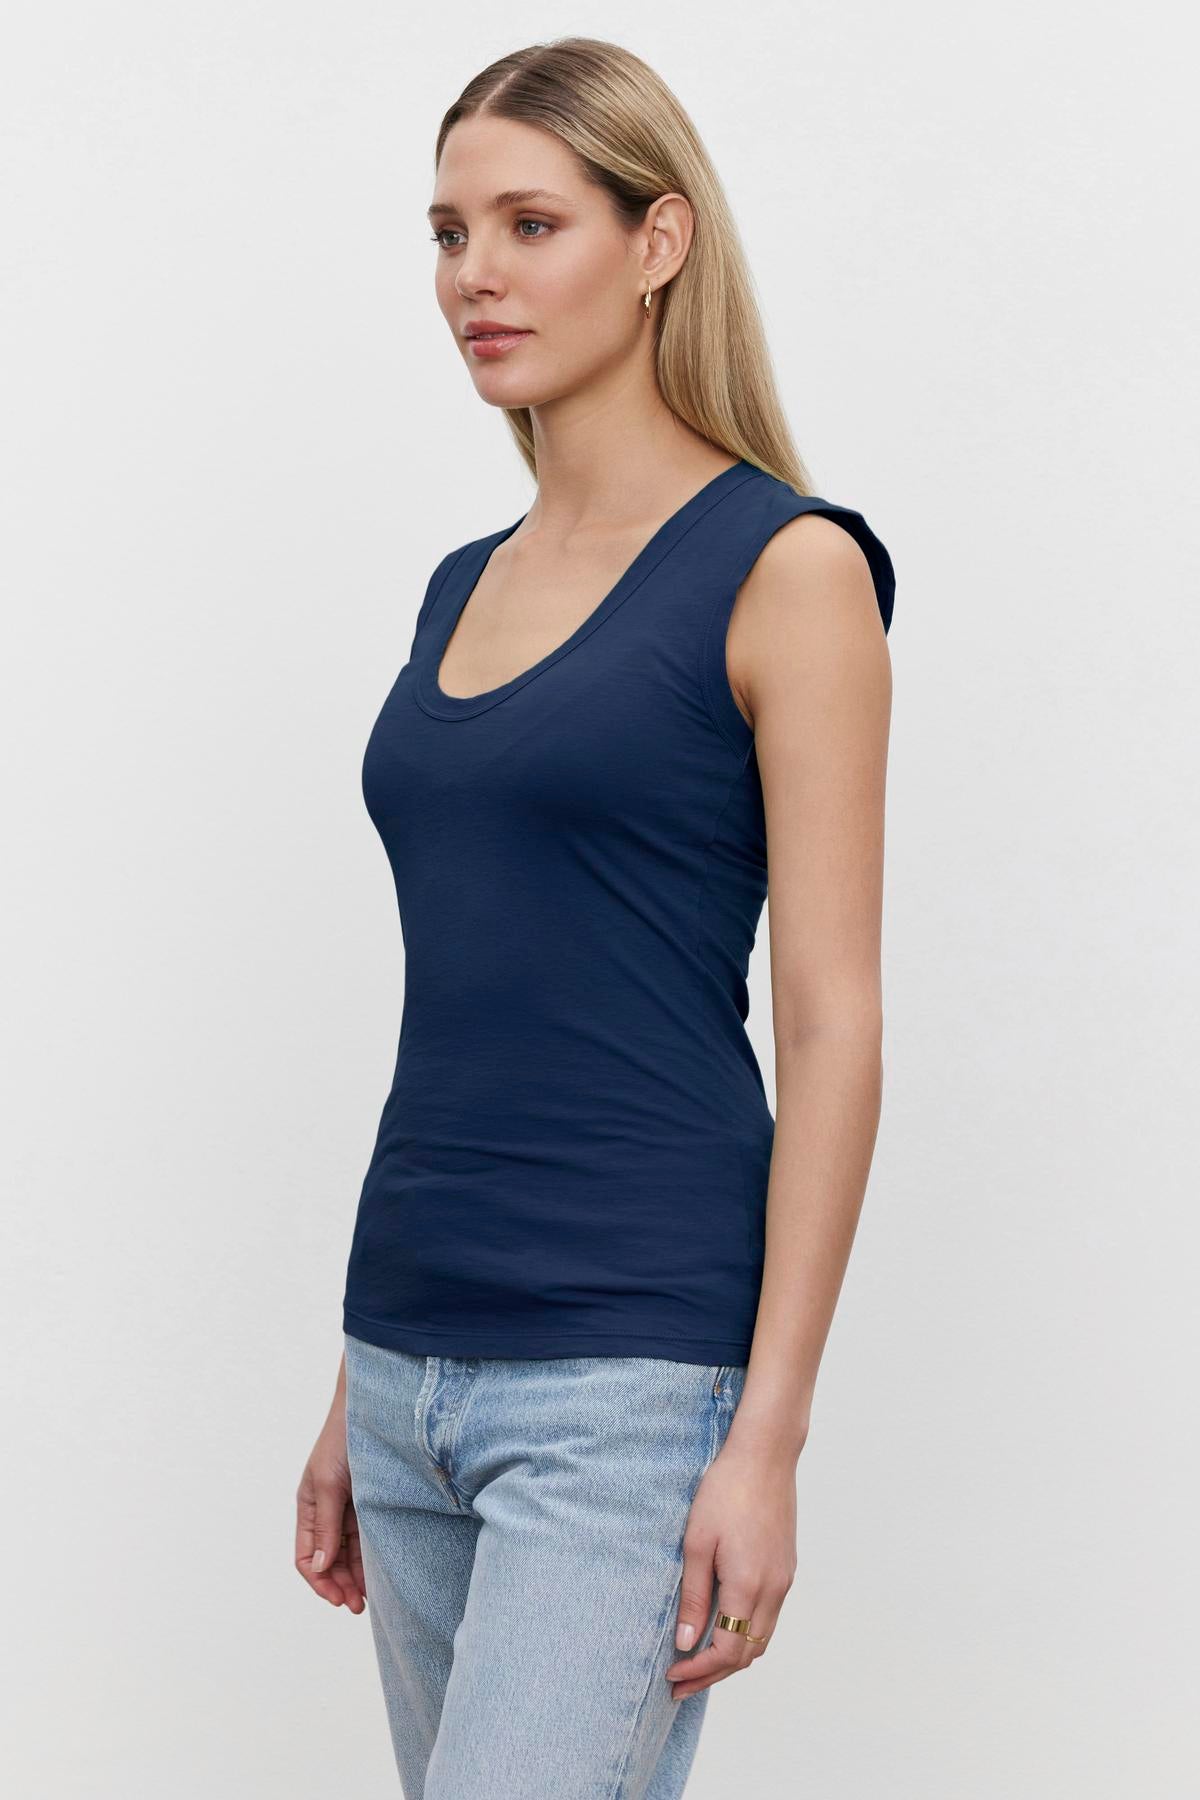   A woman with straight blond hair is wearing a navy blue, low-scoop-neck ESTINA TANK TOP by Velvet by Graham & Spencer and light blue jeans. She is standing against a plain white background, looking off to the side. 